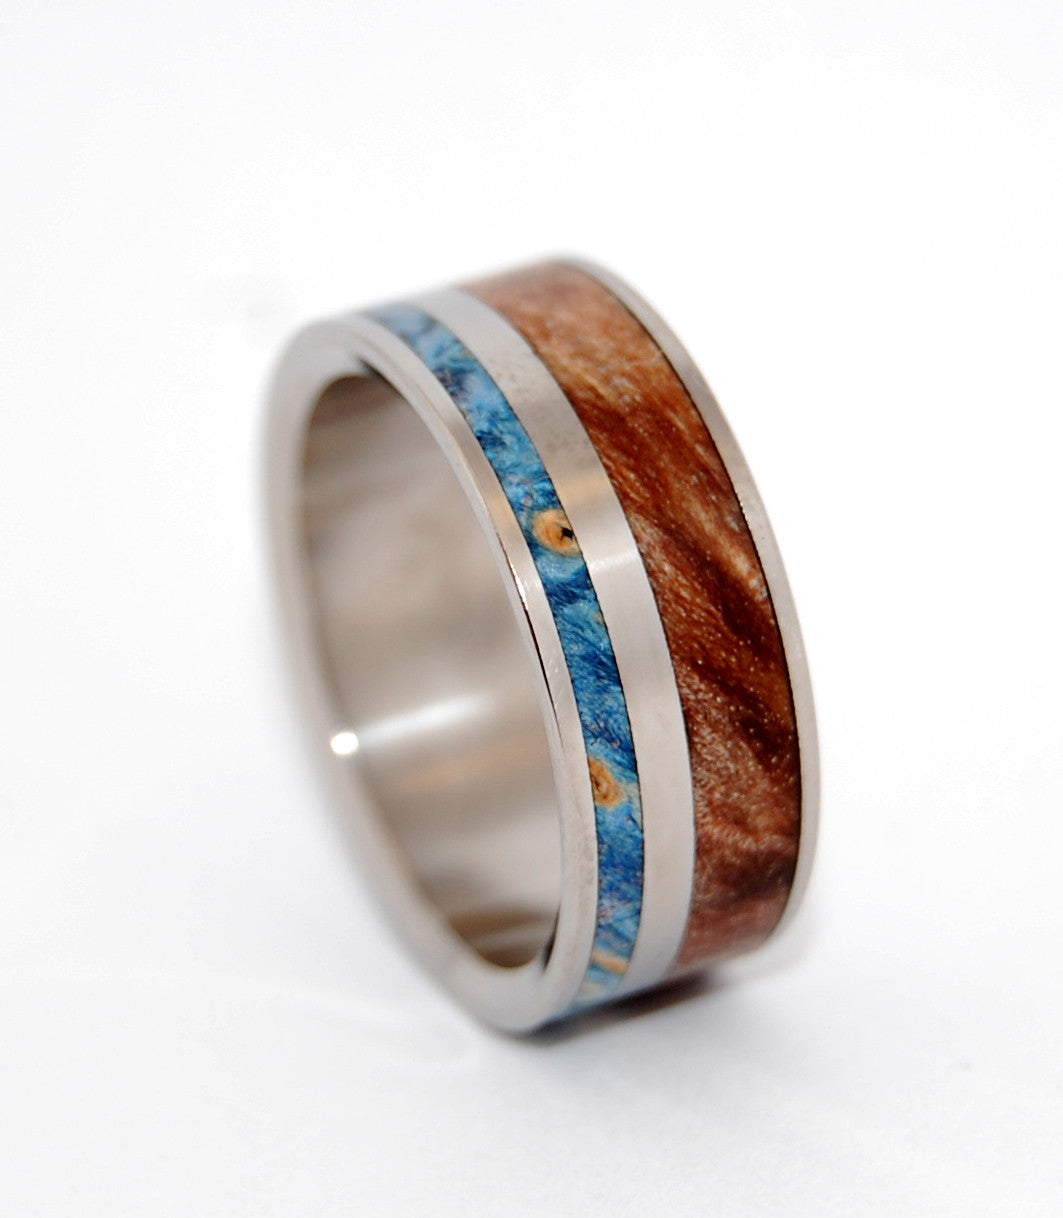 EARTH BY WATER | Maple Wood & Blue Wood Wedding Rings - Unique Wedding Rings - Minter and Richter Designs